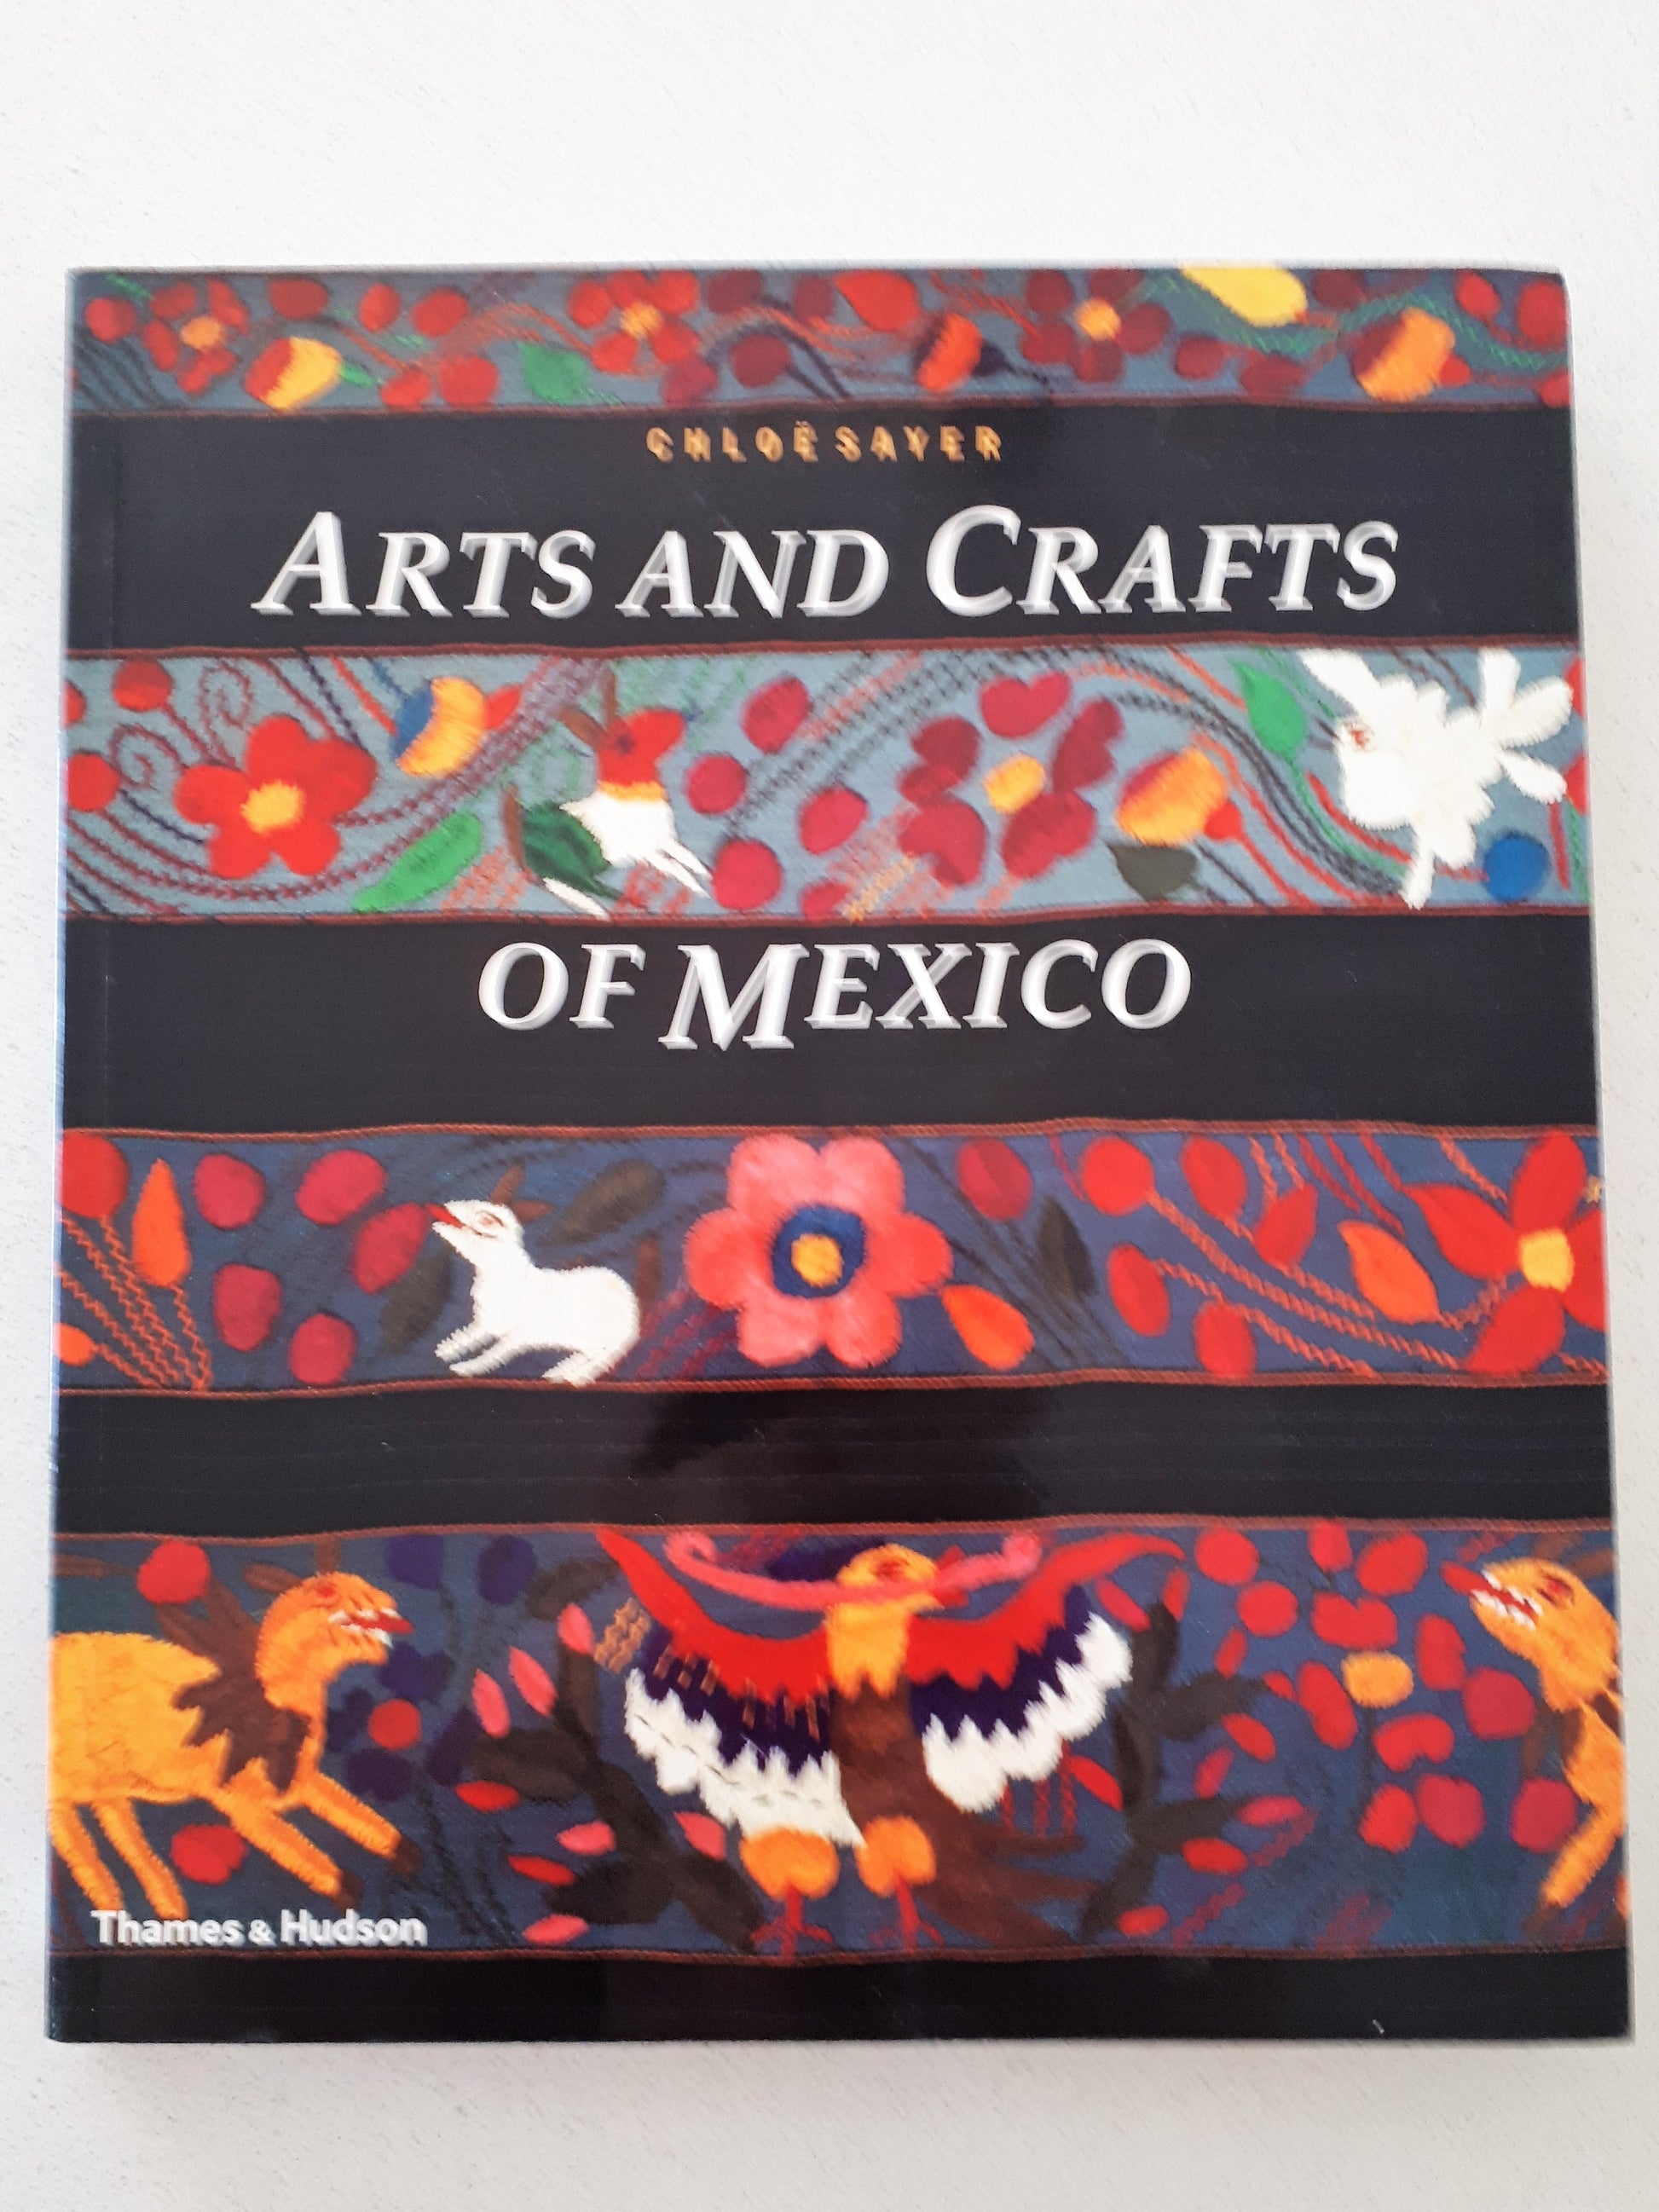 Arts And Crafts Of Mexico by Chloe Sayer